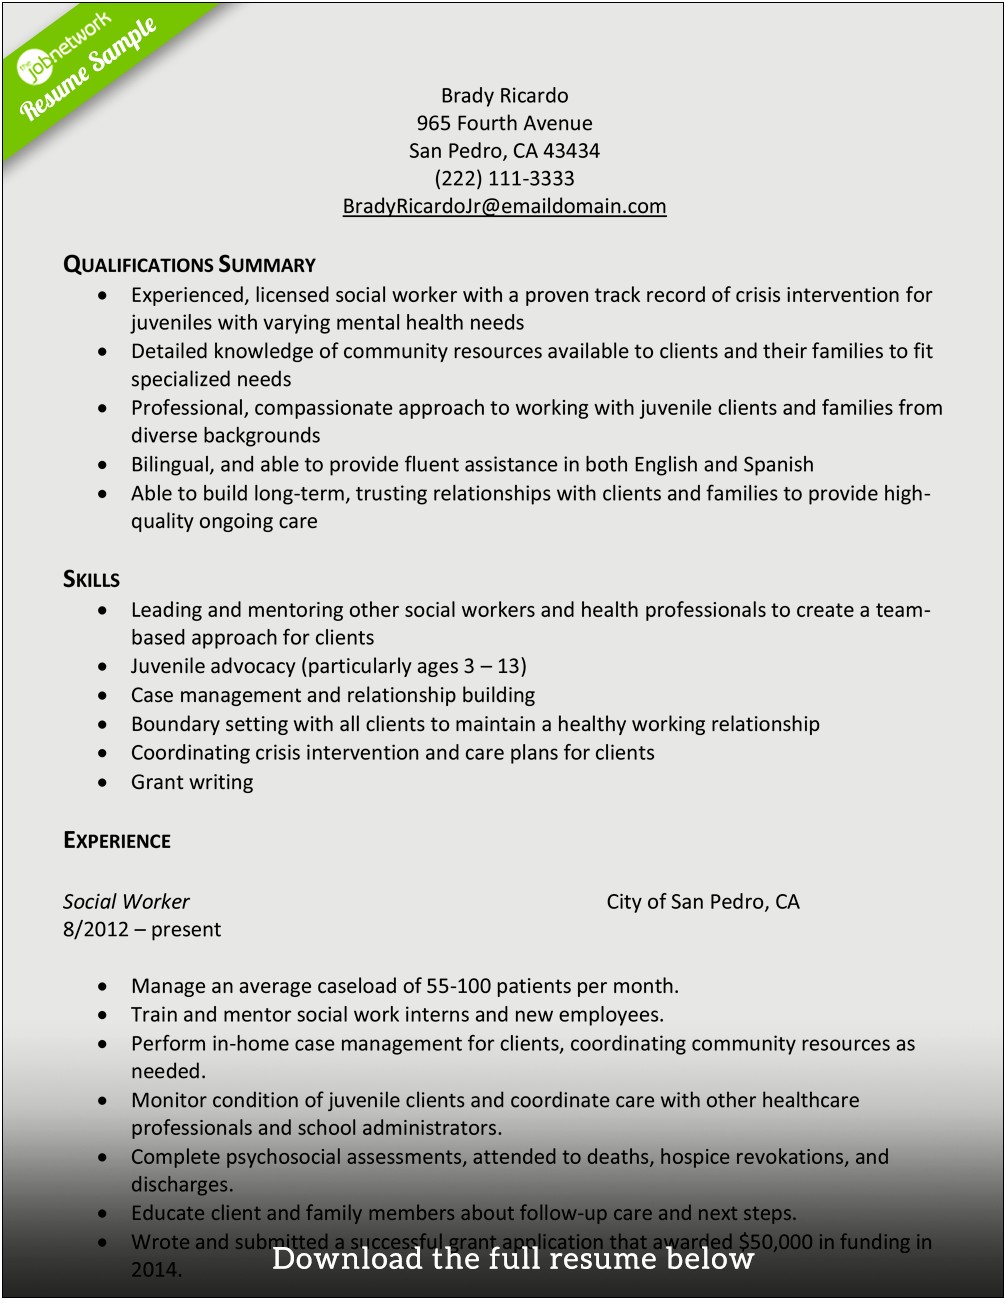 Resume Objective For Entry Level Social Worker